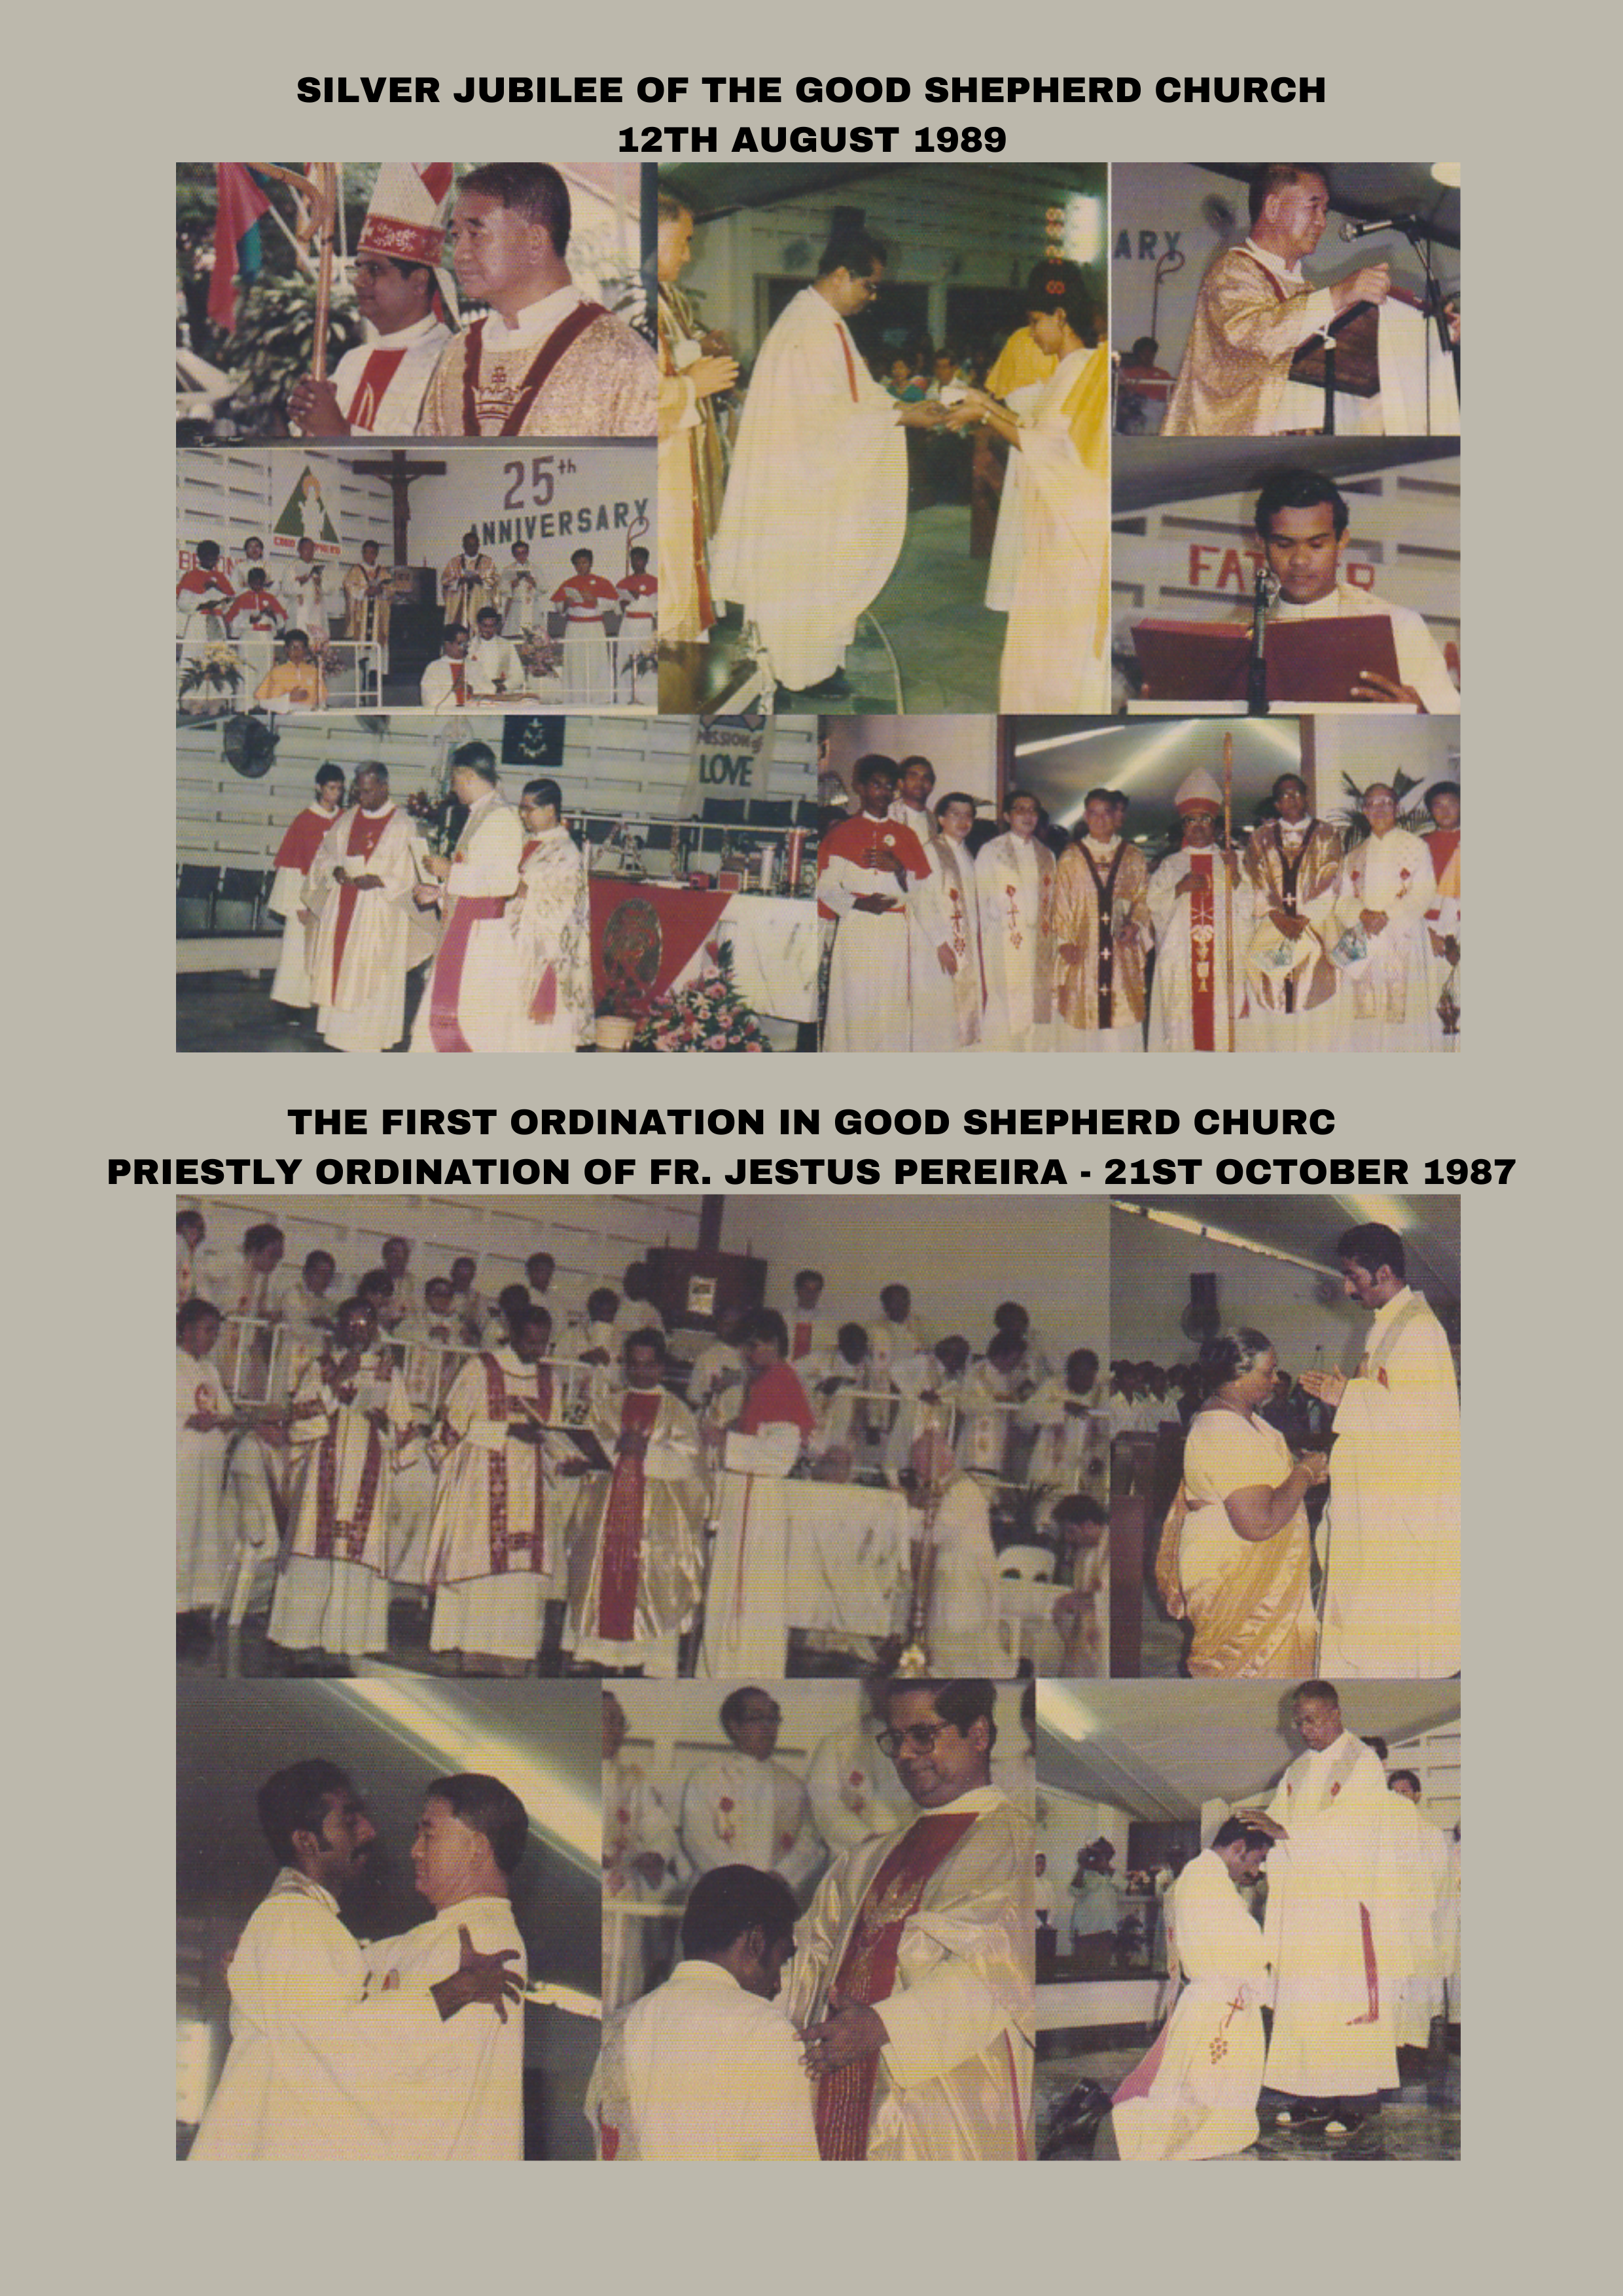 THE CHURCH IN THE 60s - PG 3